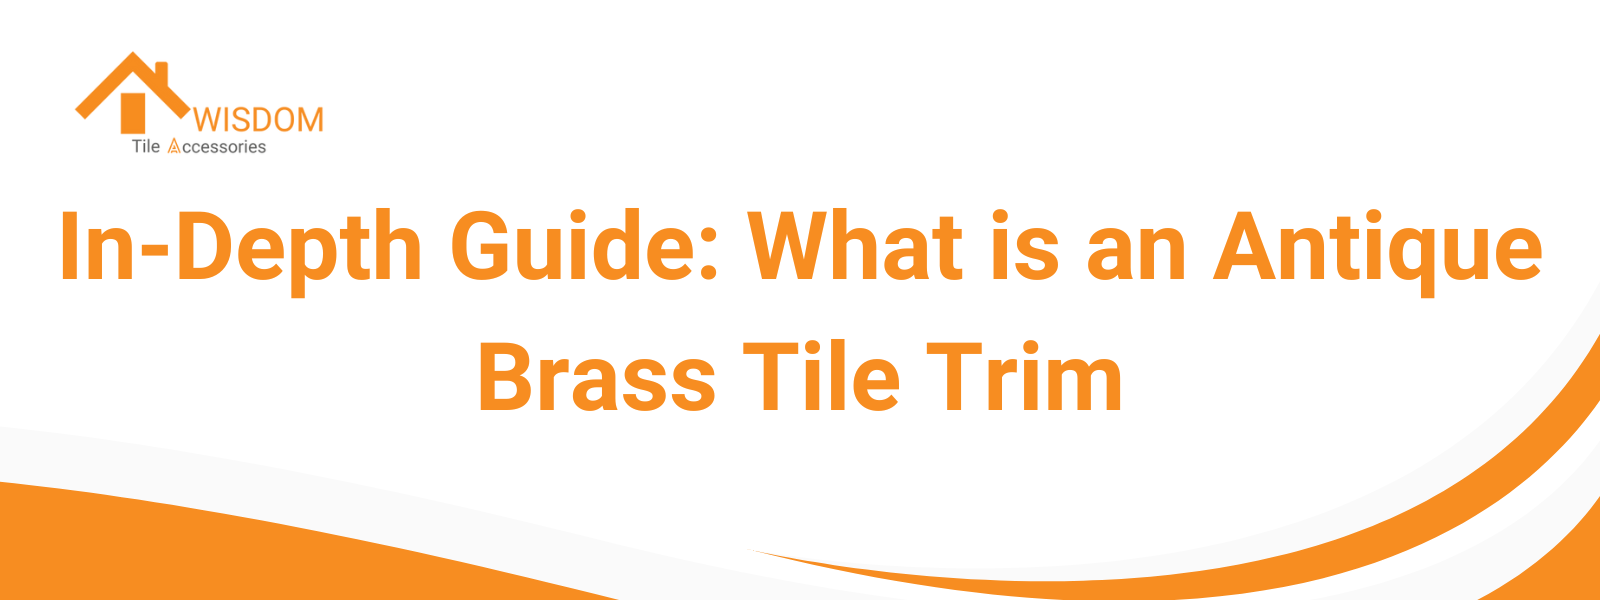 In-Depth Guide: What is an Antique Brass Tile Trim